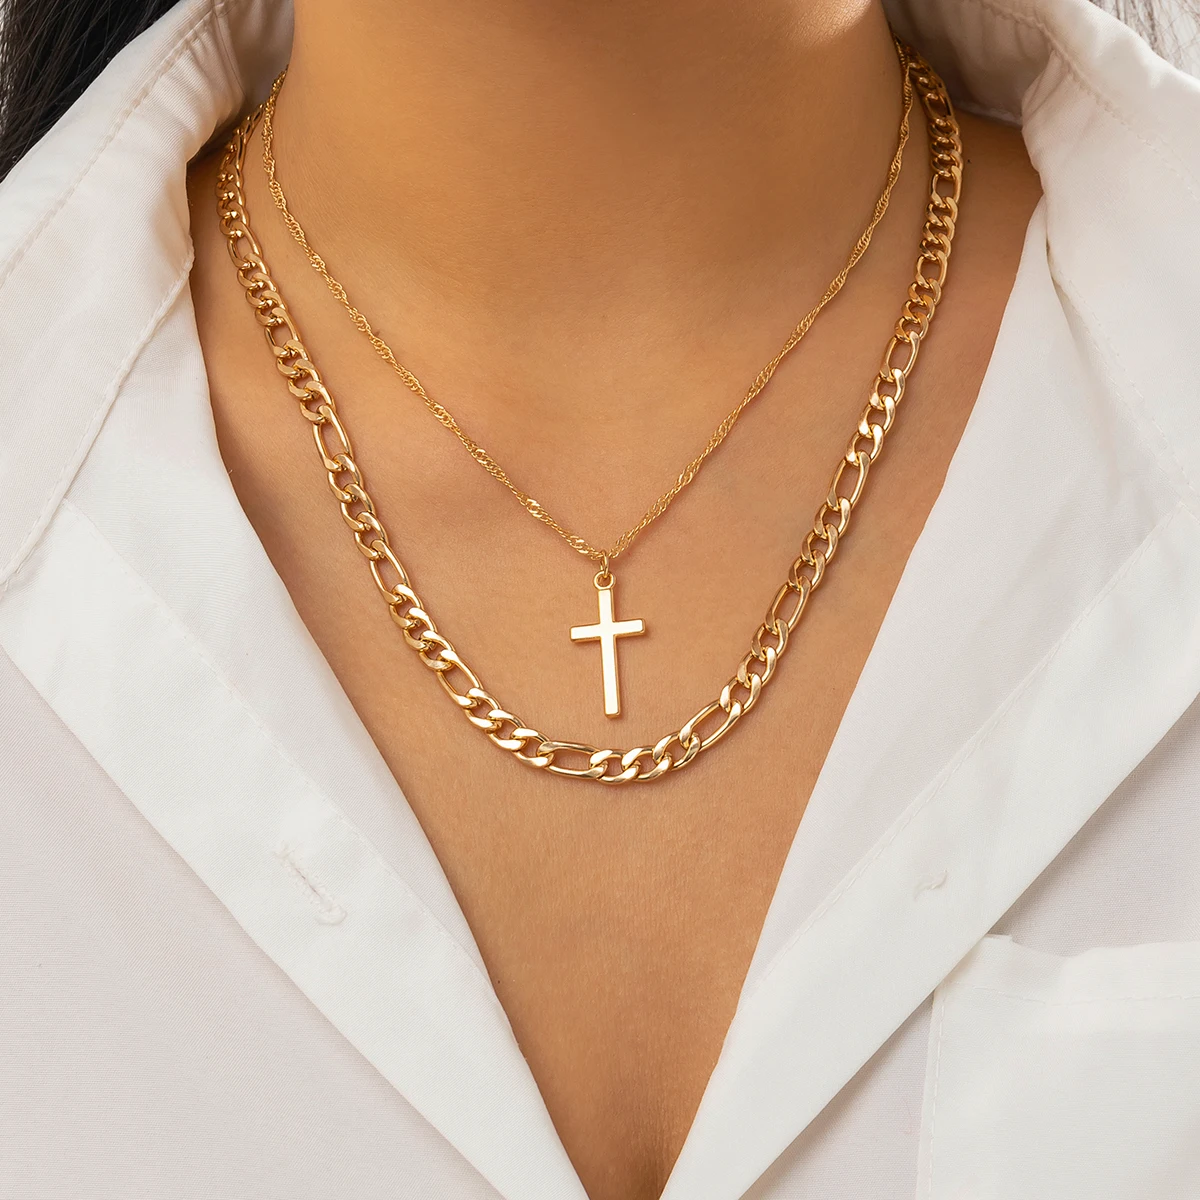 

Salircon Fashion New Figaro Chain Necklace For Men Punk Simple Smooth Metal Cross Pendant Necklace Hip Hop Jewelry Gift